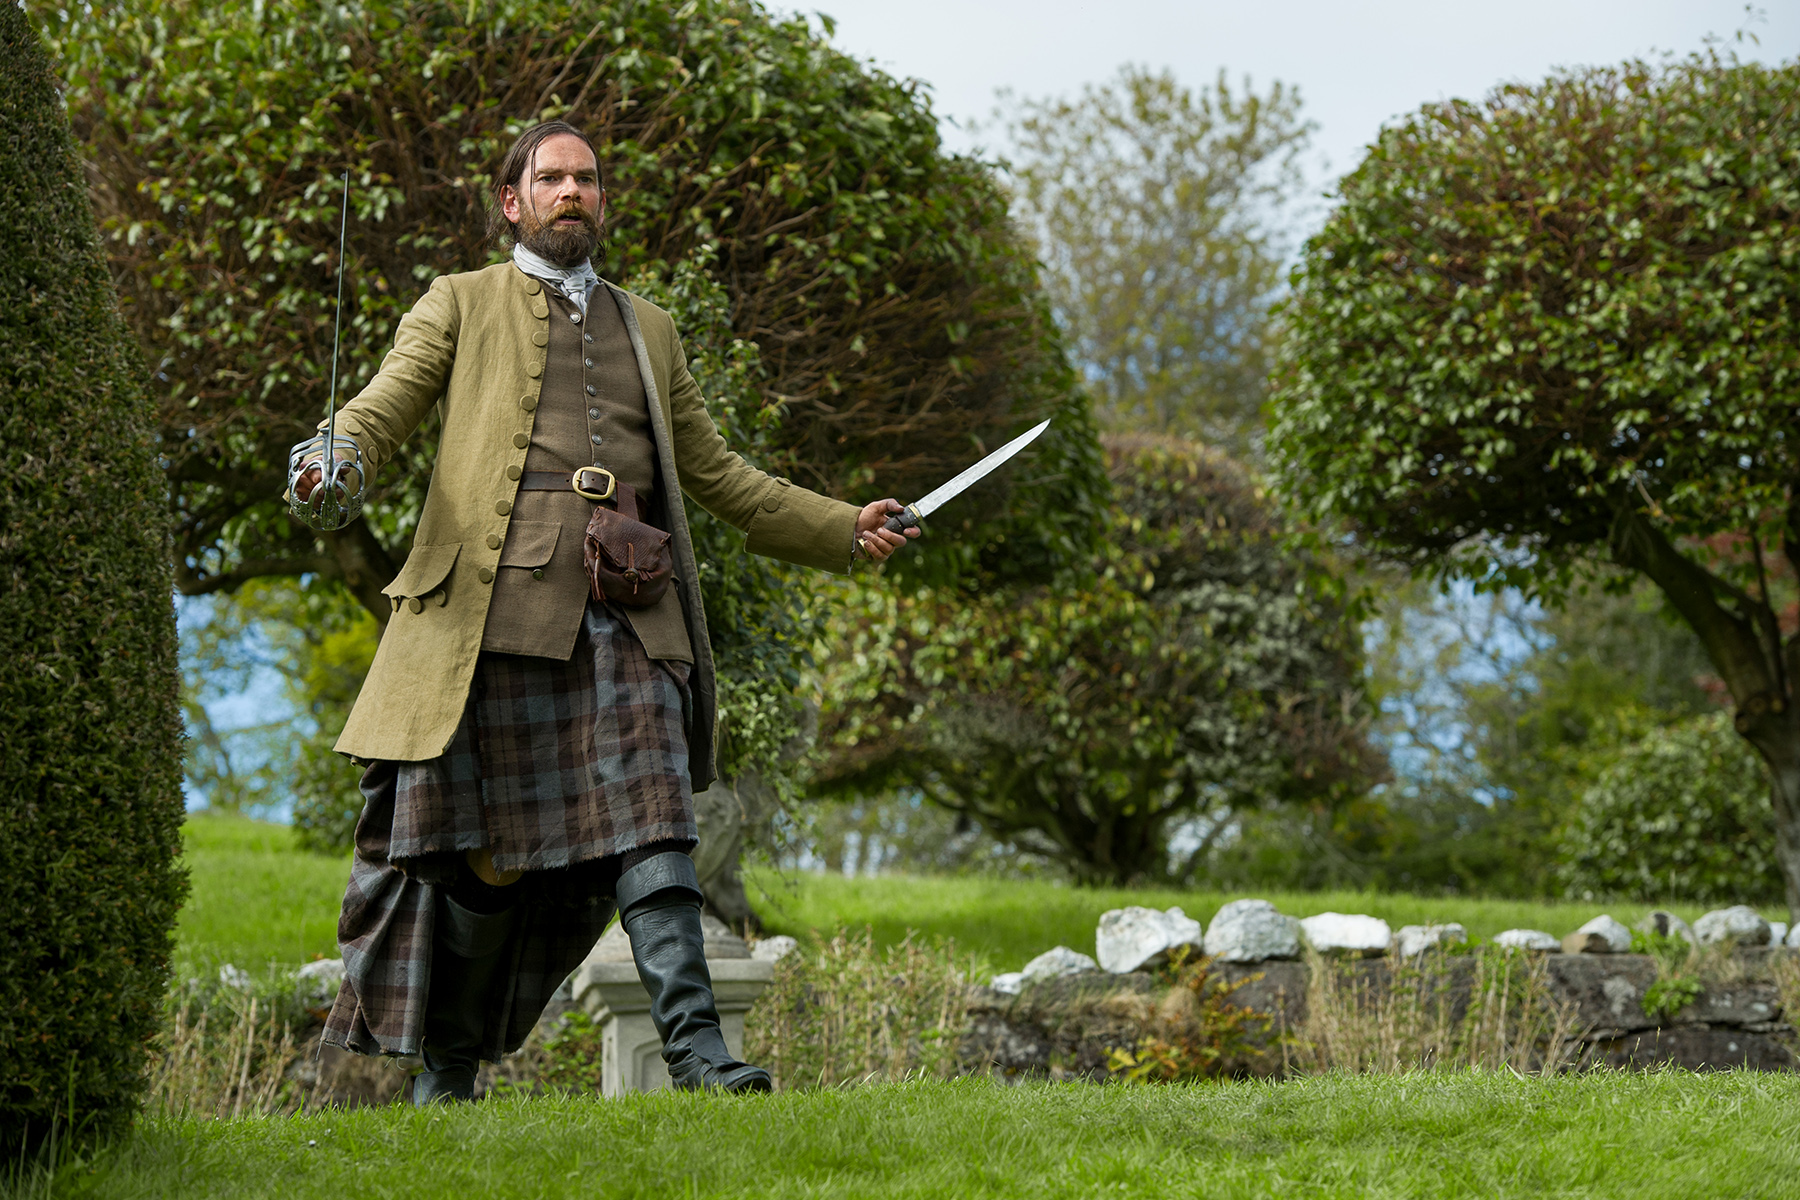 Murtagh (Duncan Lacroix) threatening to cut private parts off of some Frenchmen as a way to let off steam.